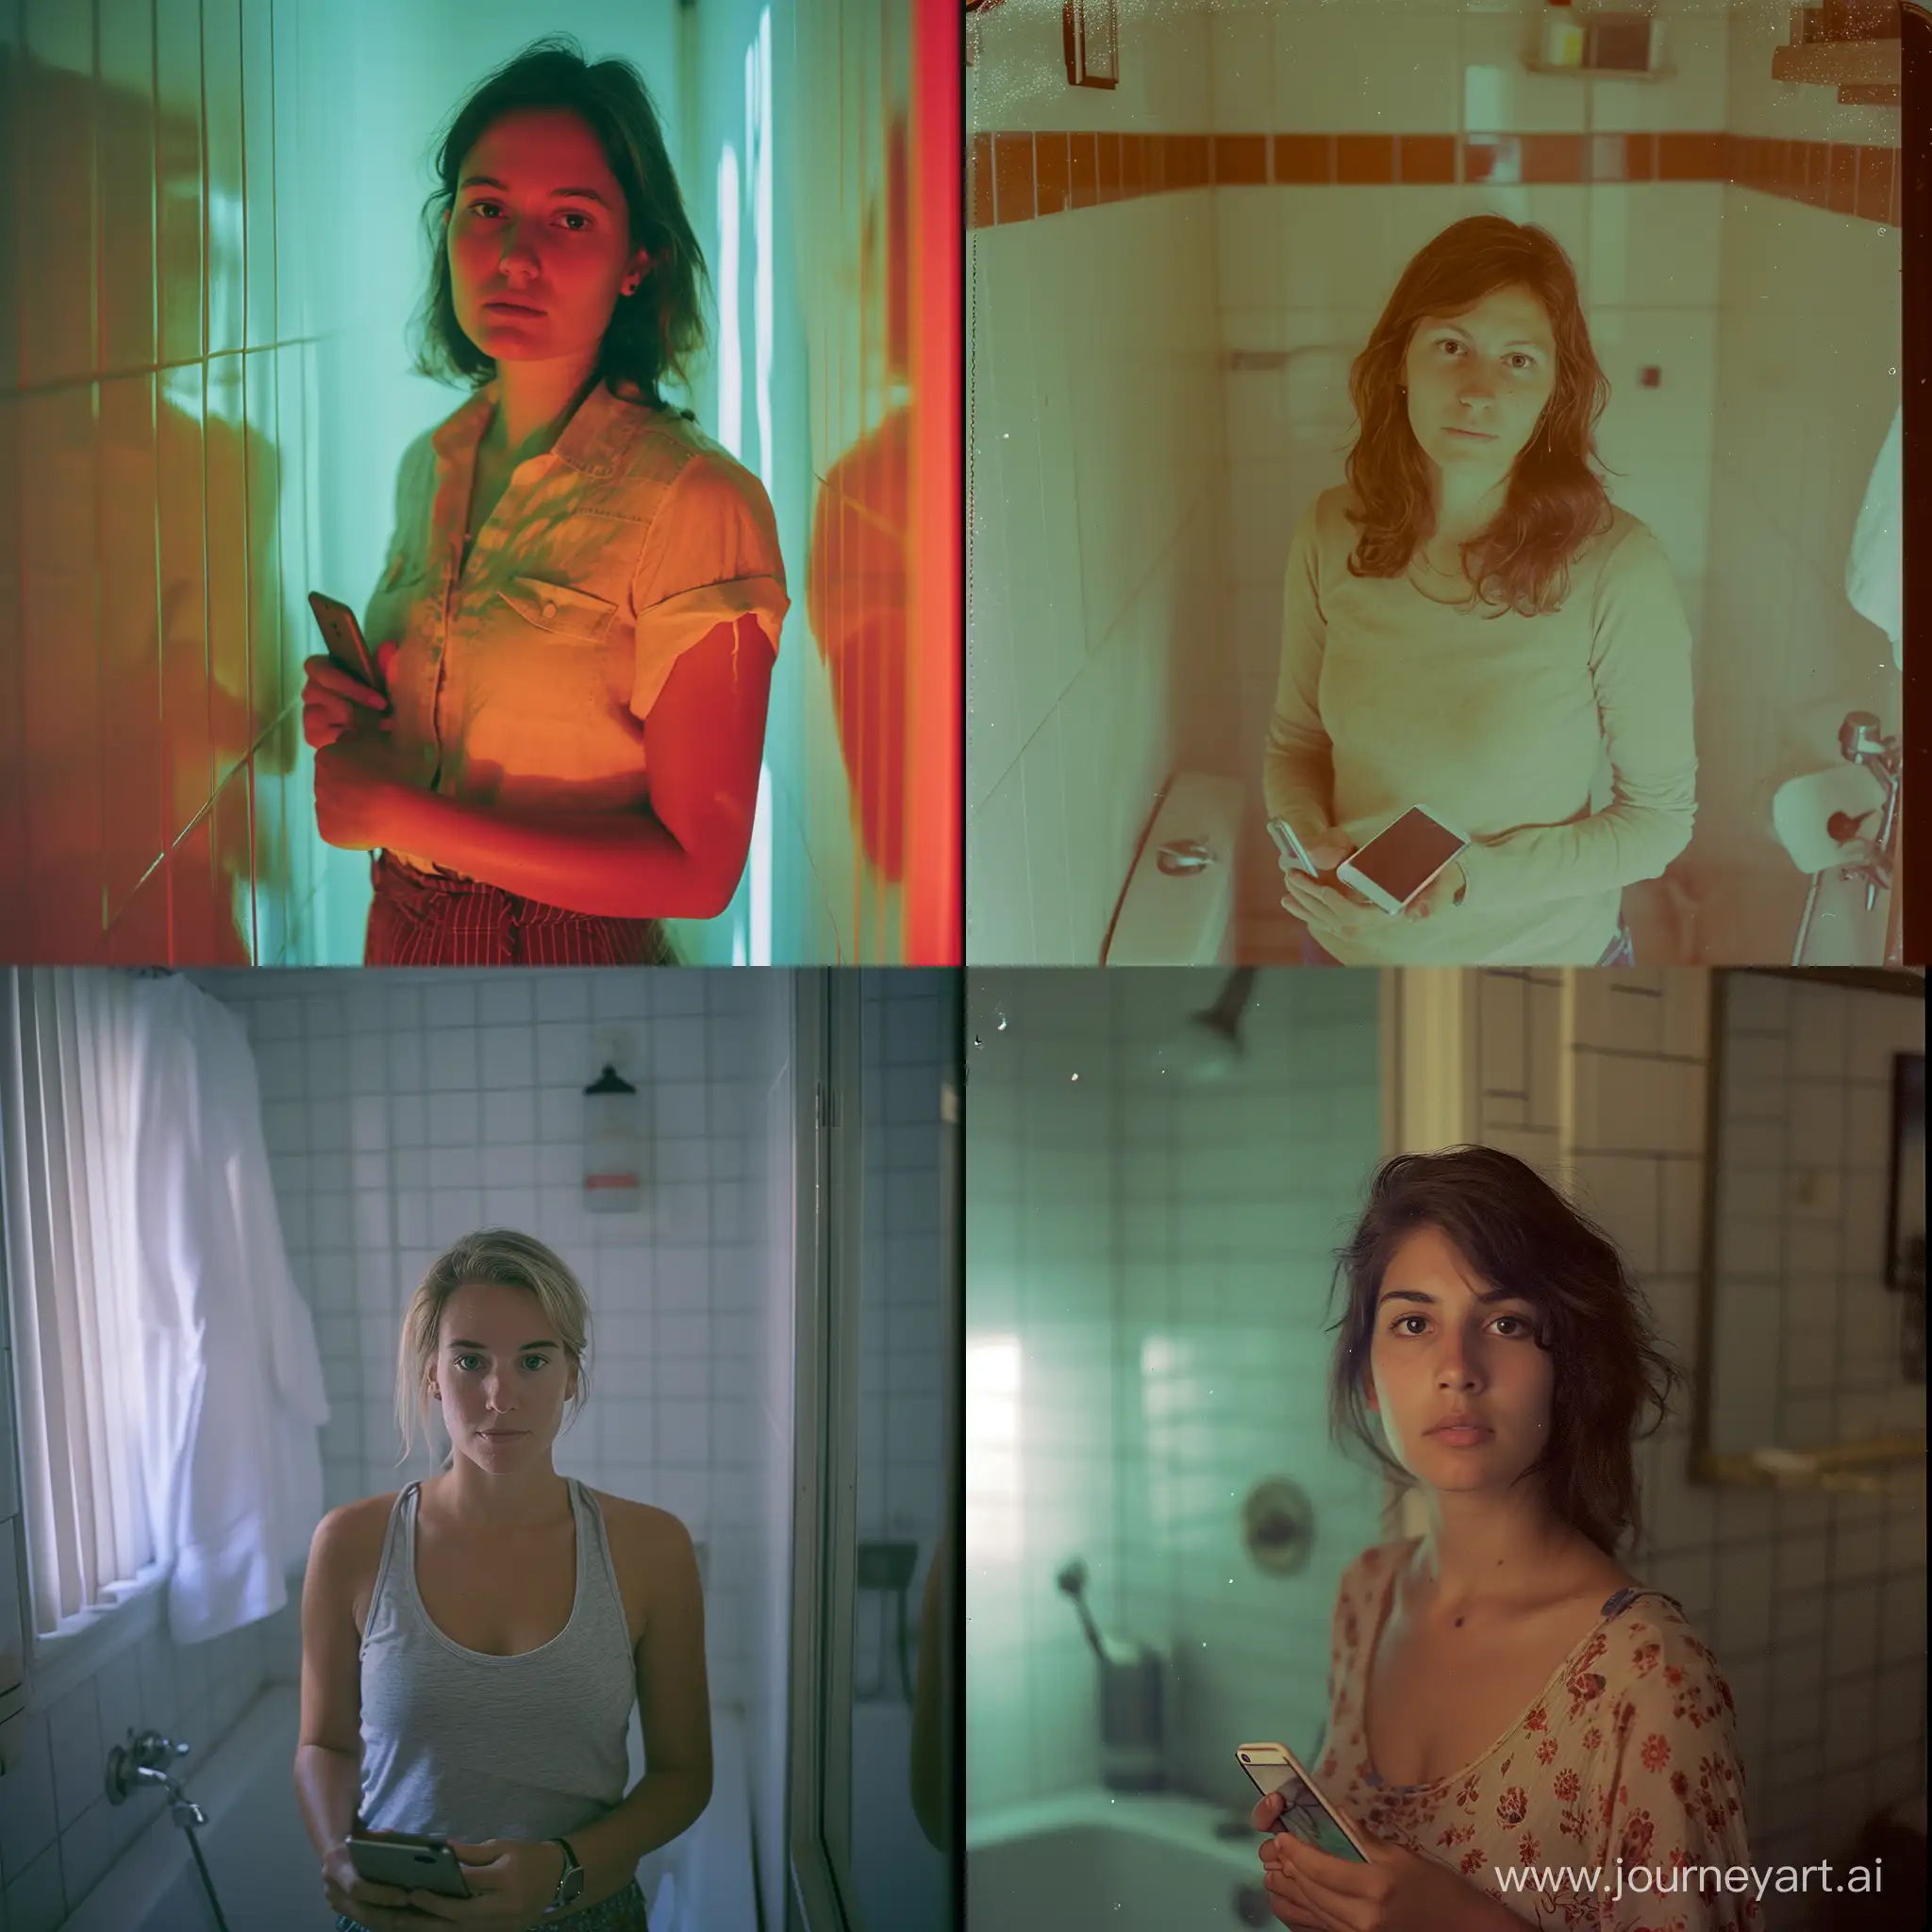 a women standing in her bathroom, photography taken on a disposable camera, close up view, natural lighting, day time, looking at the viewer, documentary photography, naturalism, noise photo effect, vibrant photo, holding a iphone,